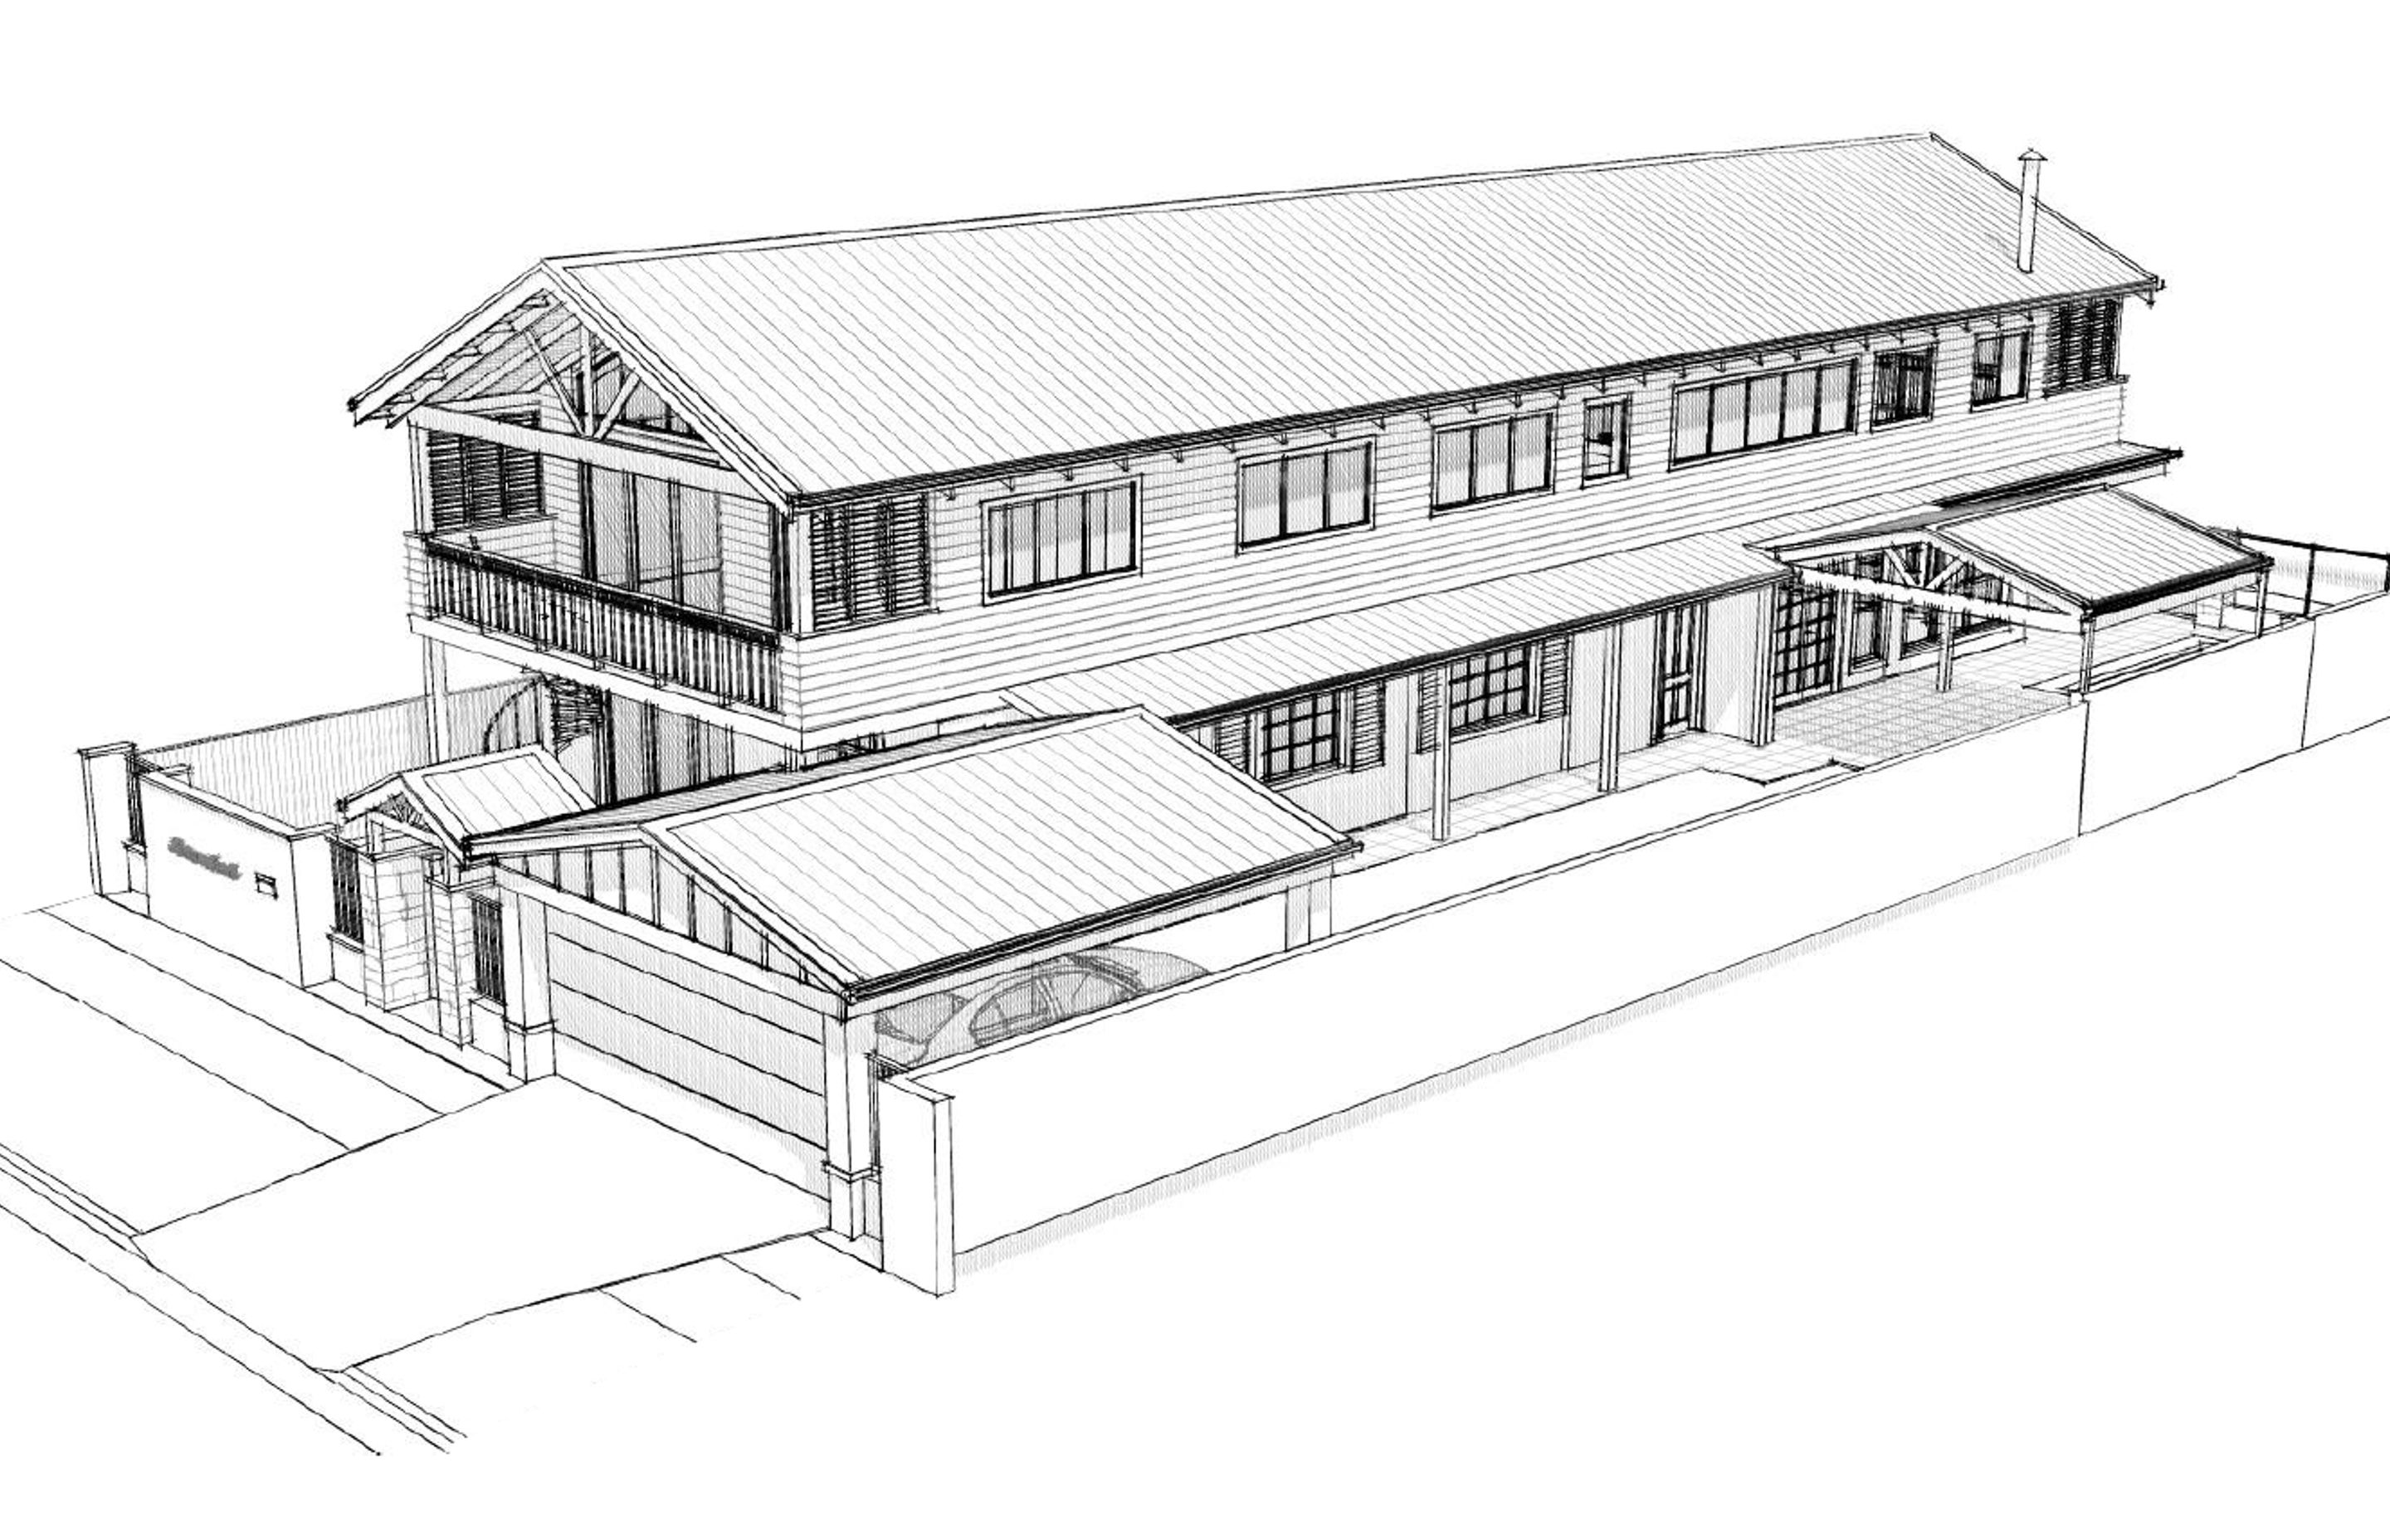 Overall 3D Sketch Perspective